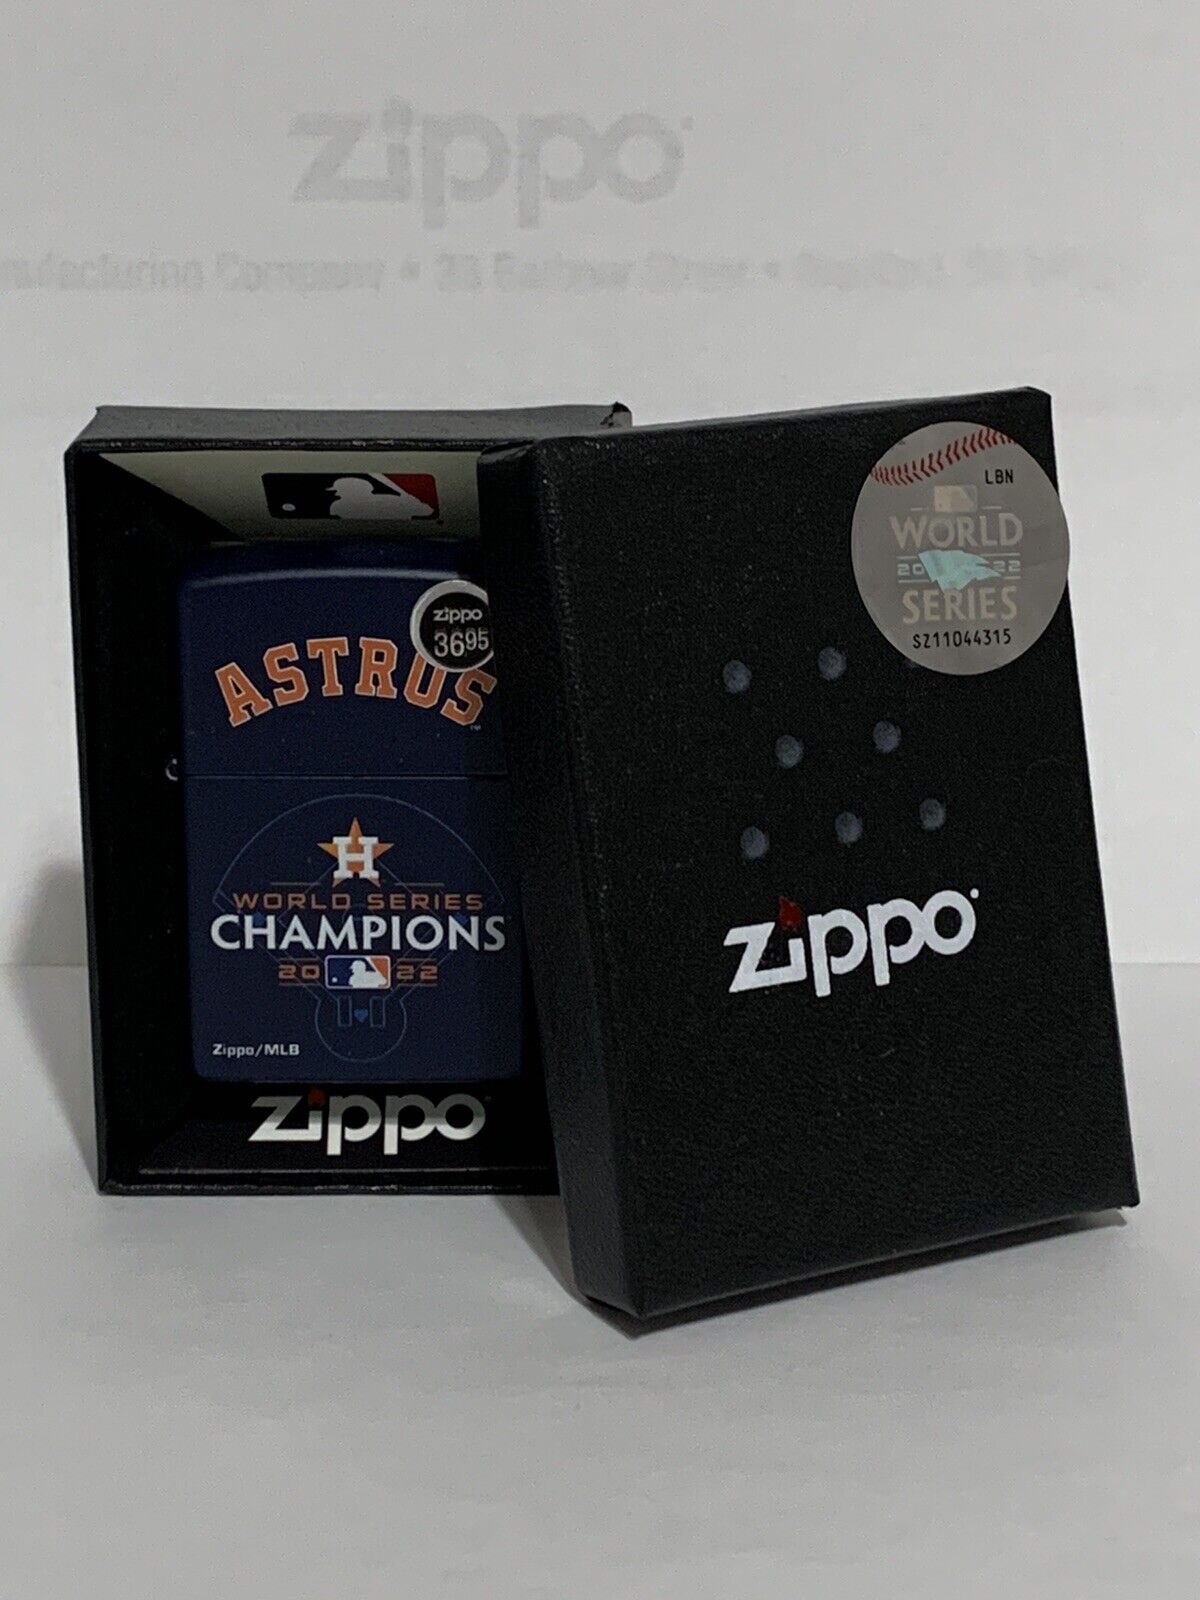 New, Zippo Authentic Windproof Lighter, Houston Astros World Series Champs 2022